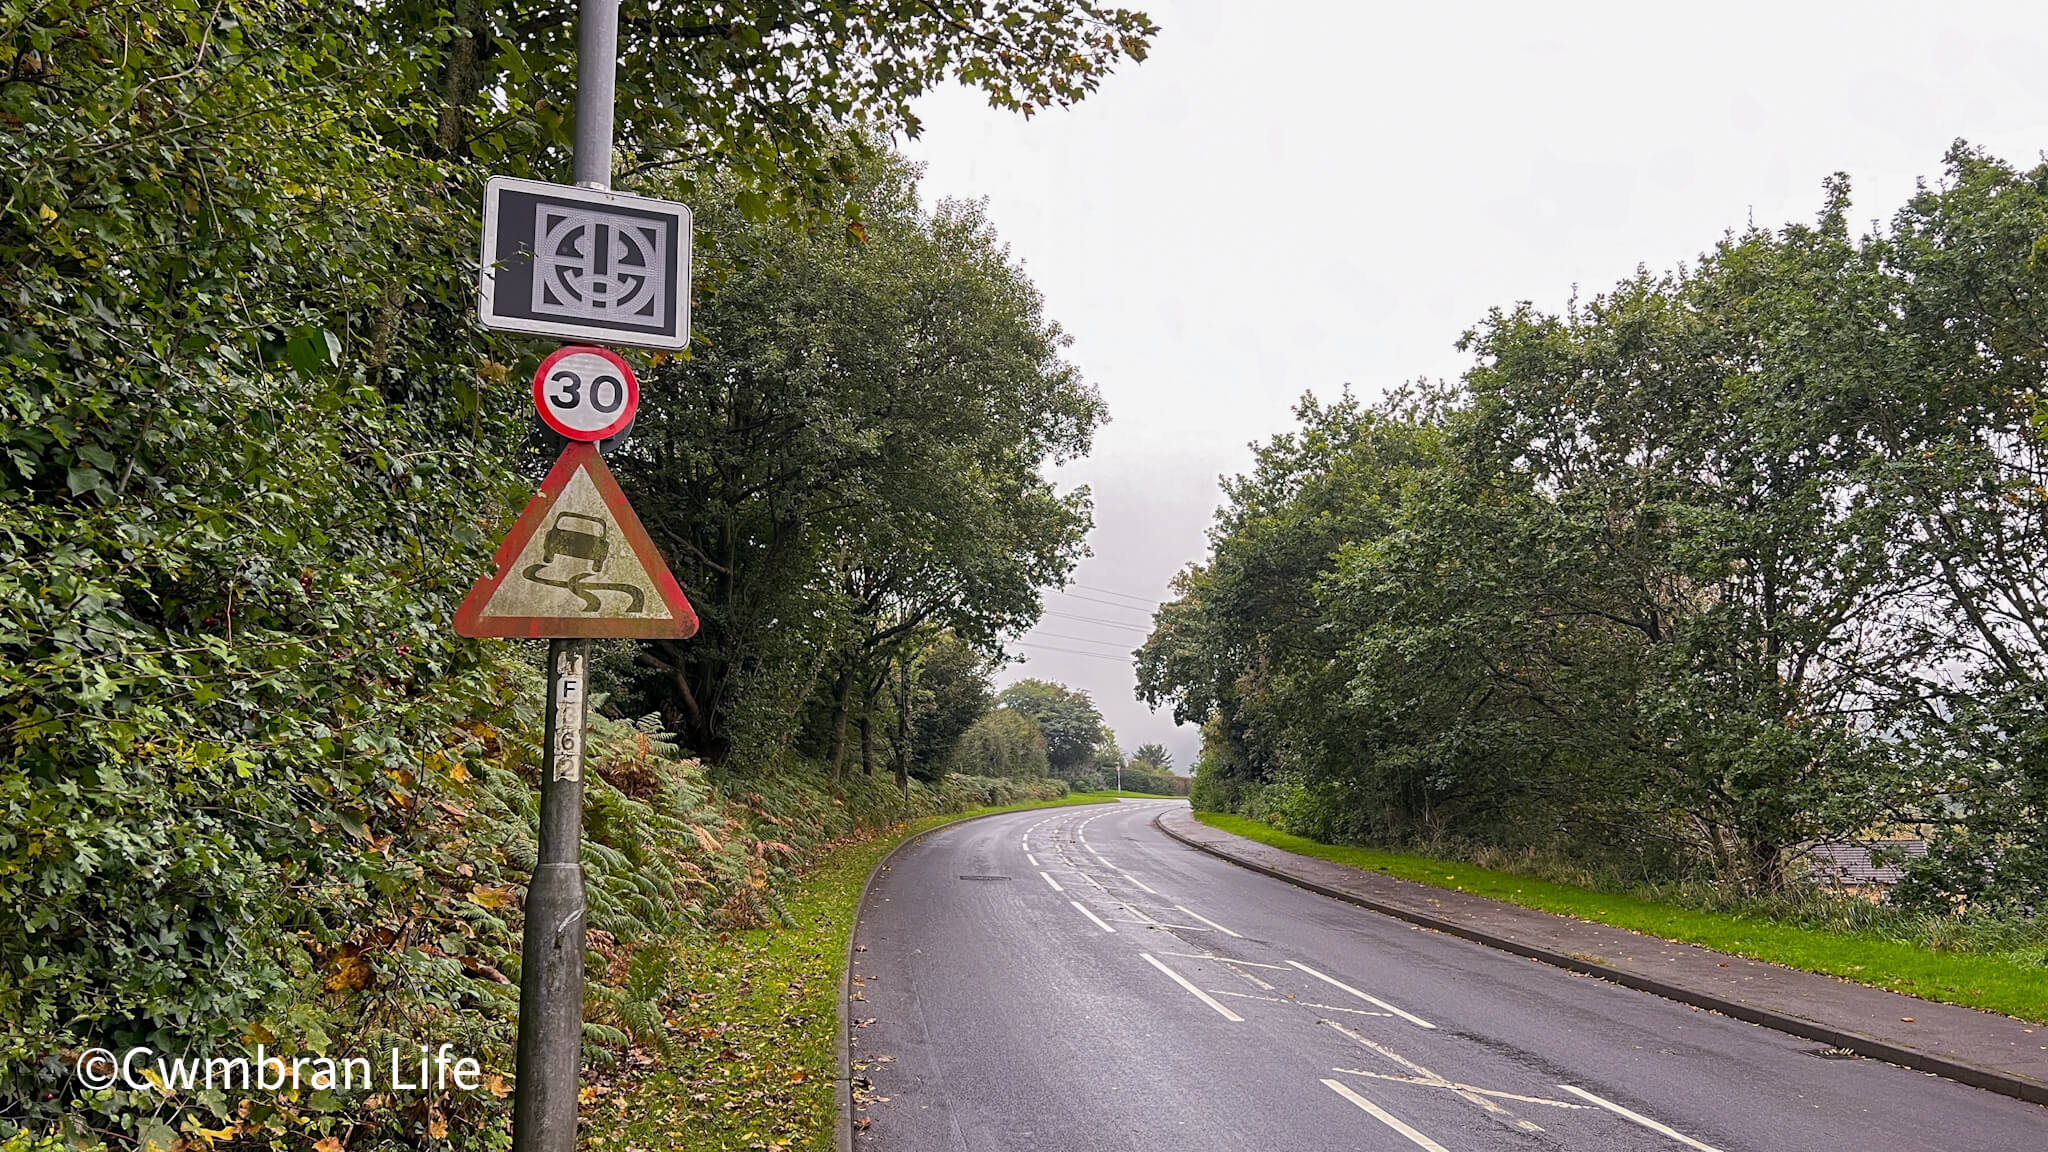 a speed indicator sign on a road